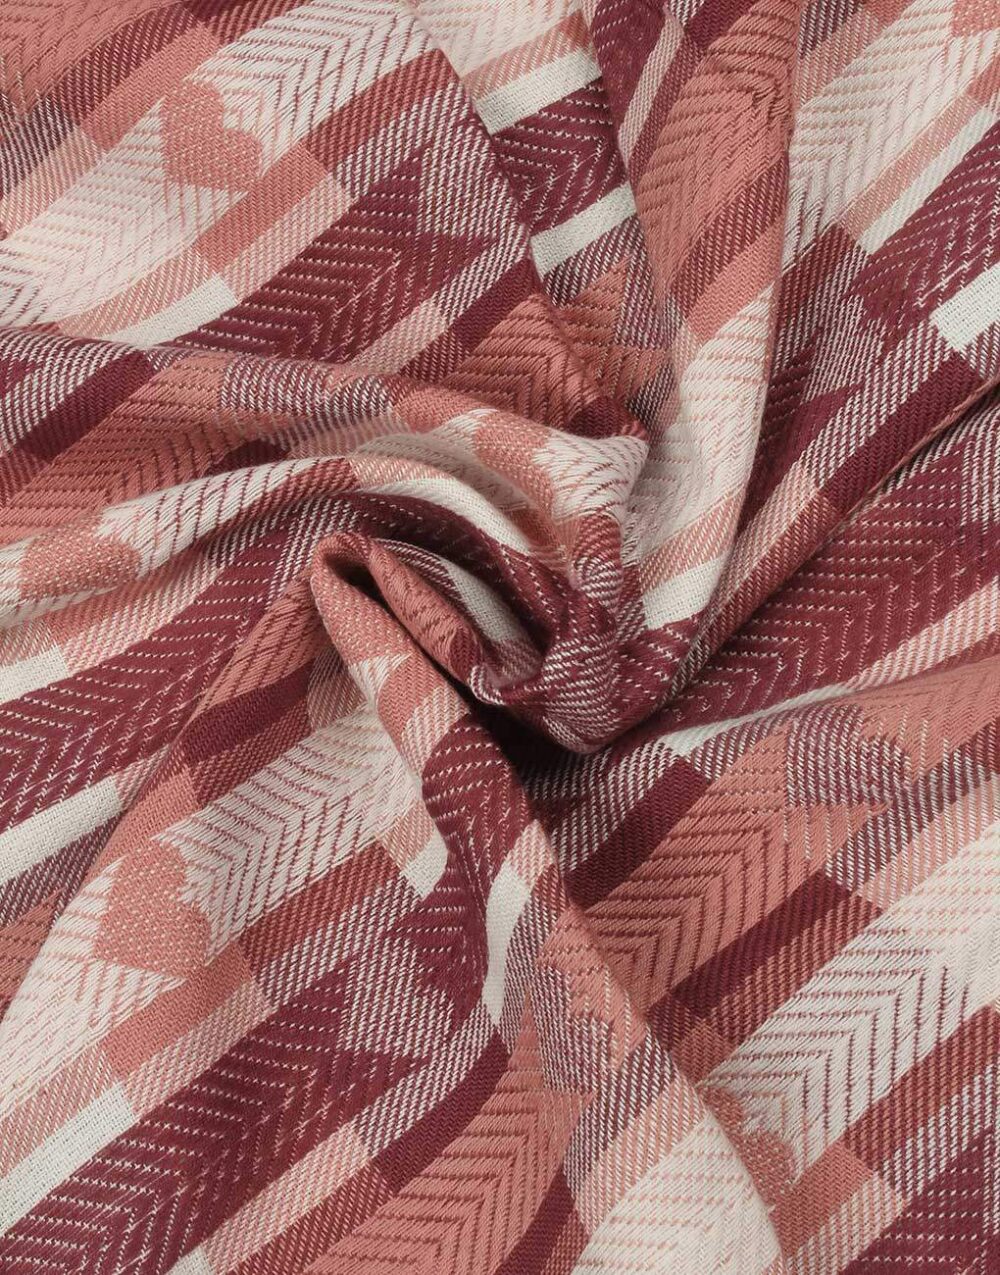 Herringbone Twill Buffalo Plaid fabric with woven hearts, for classic children's clothing, bowties, retro dresses & skirts.